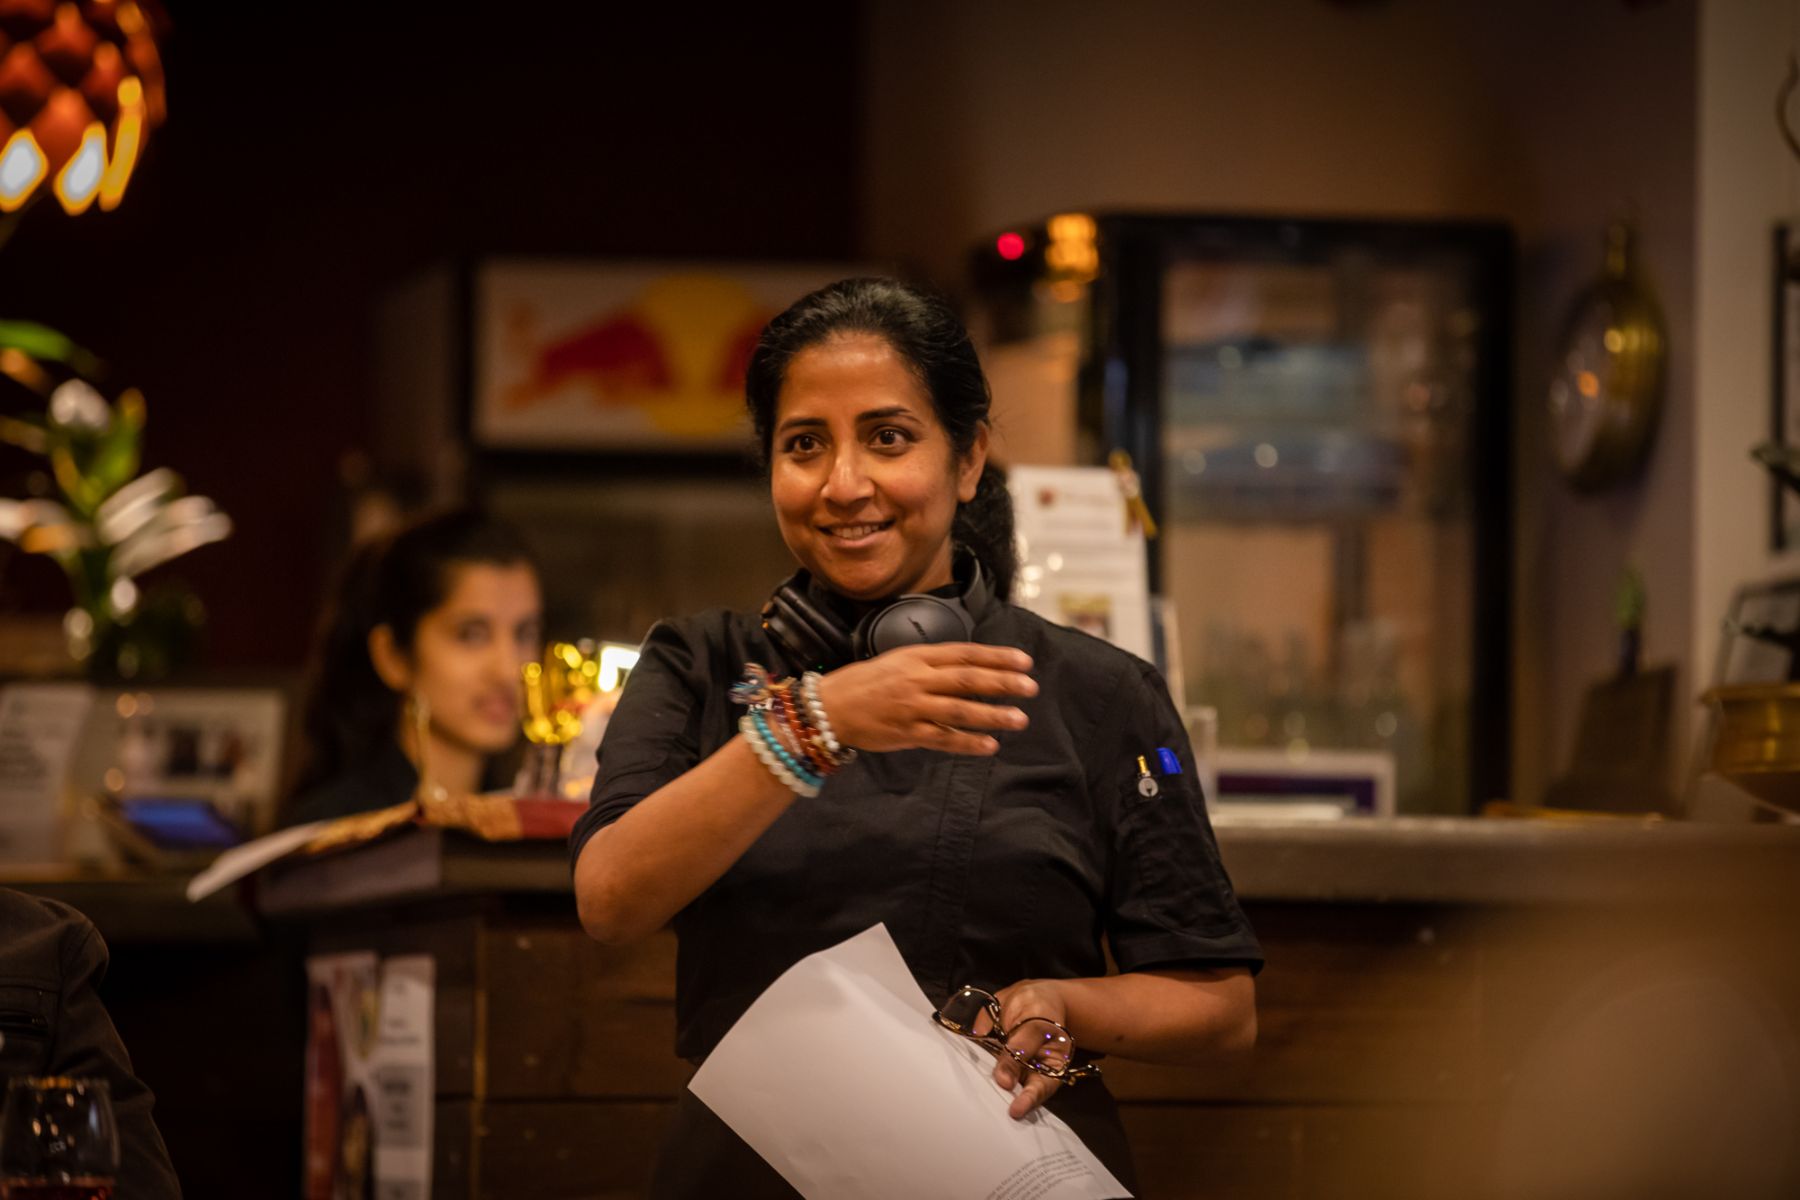 Who's the Boss in this Indian Kitchen? We talk to Sunita and Sanjay Kumar from Daana.